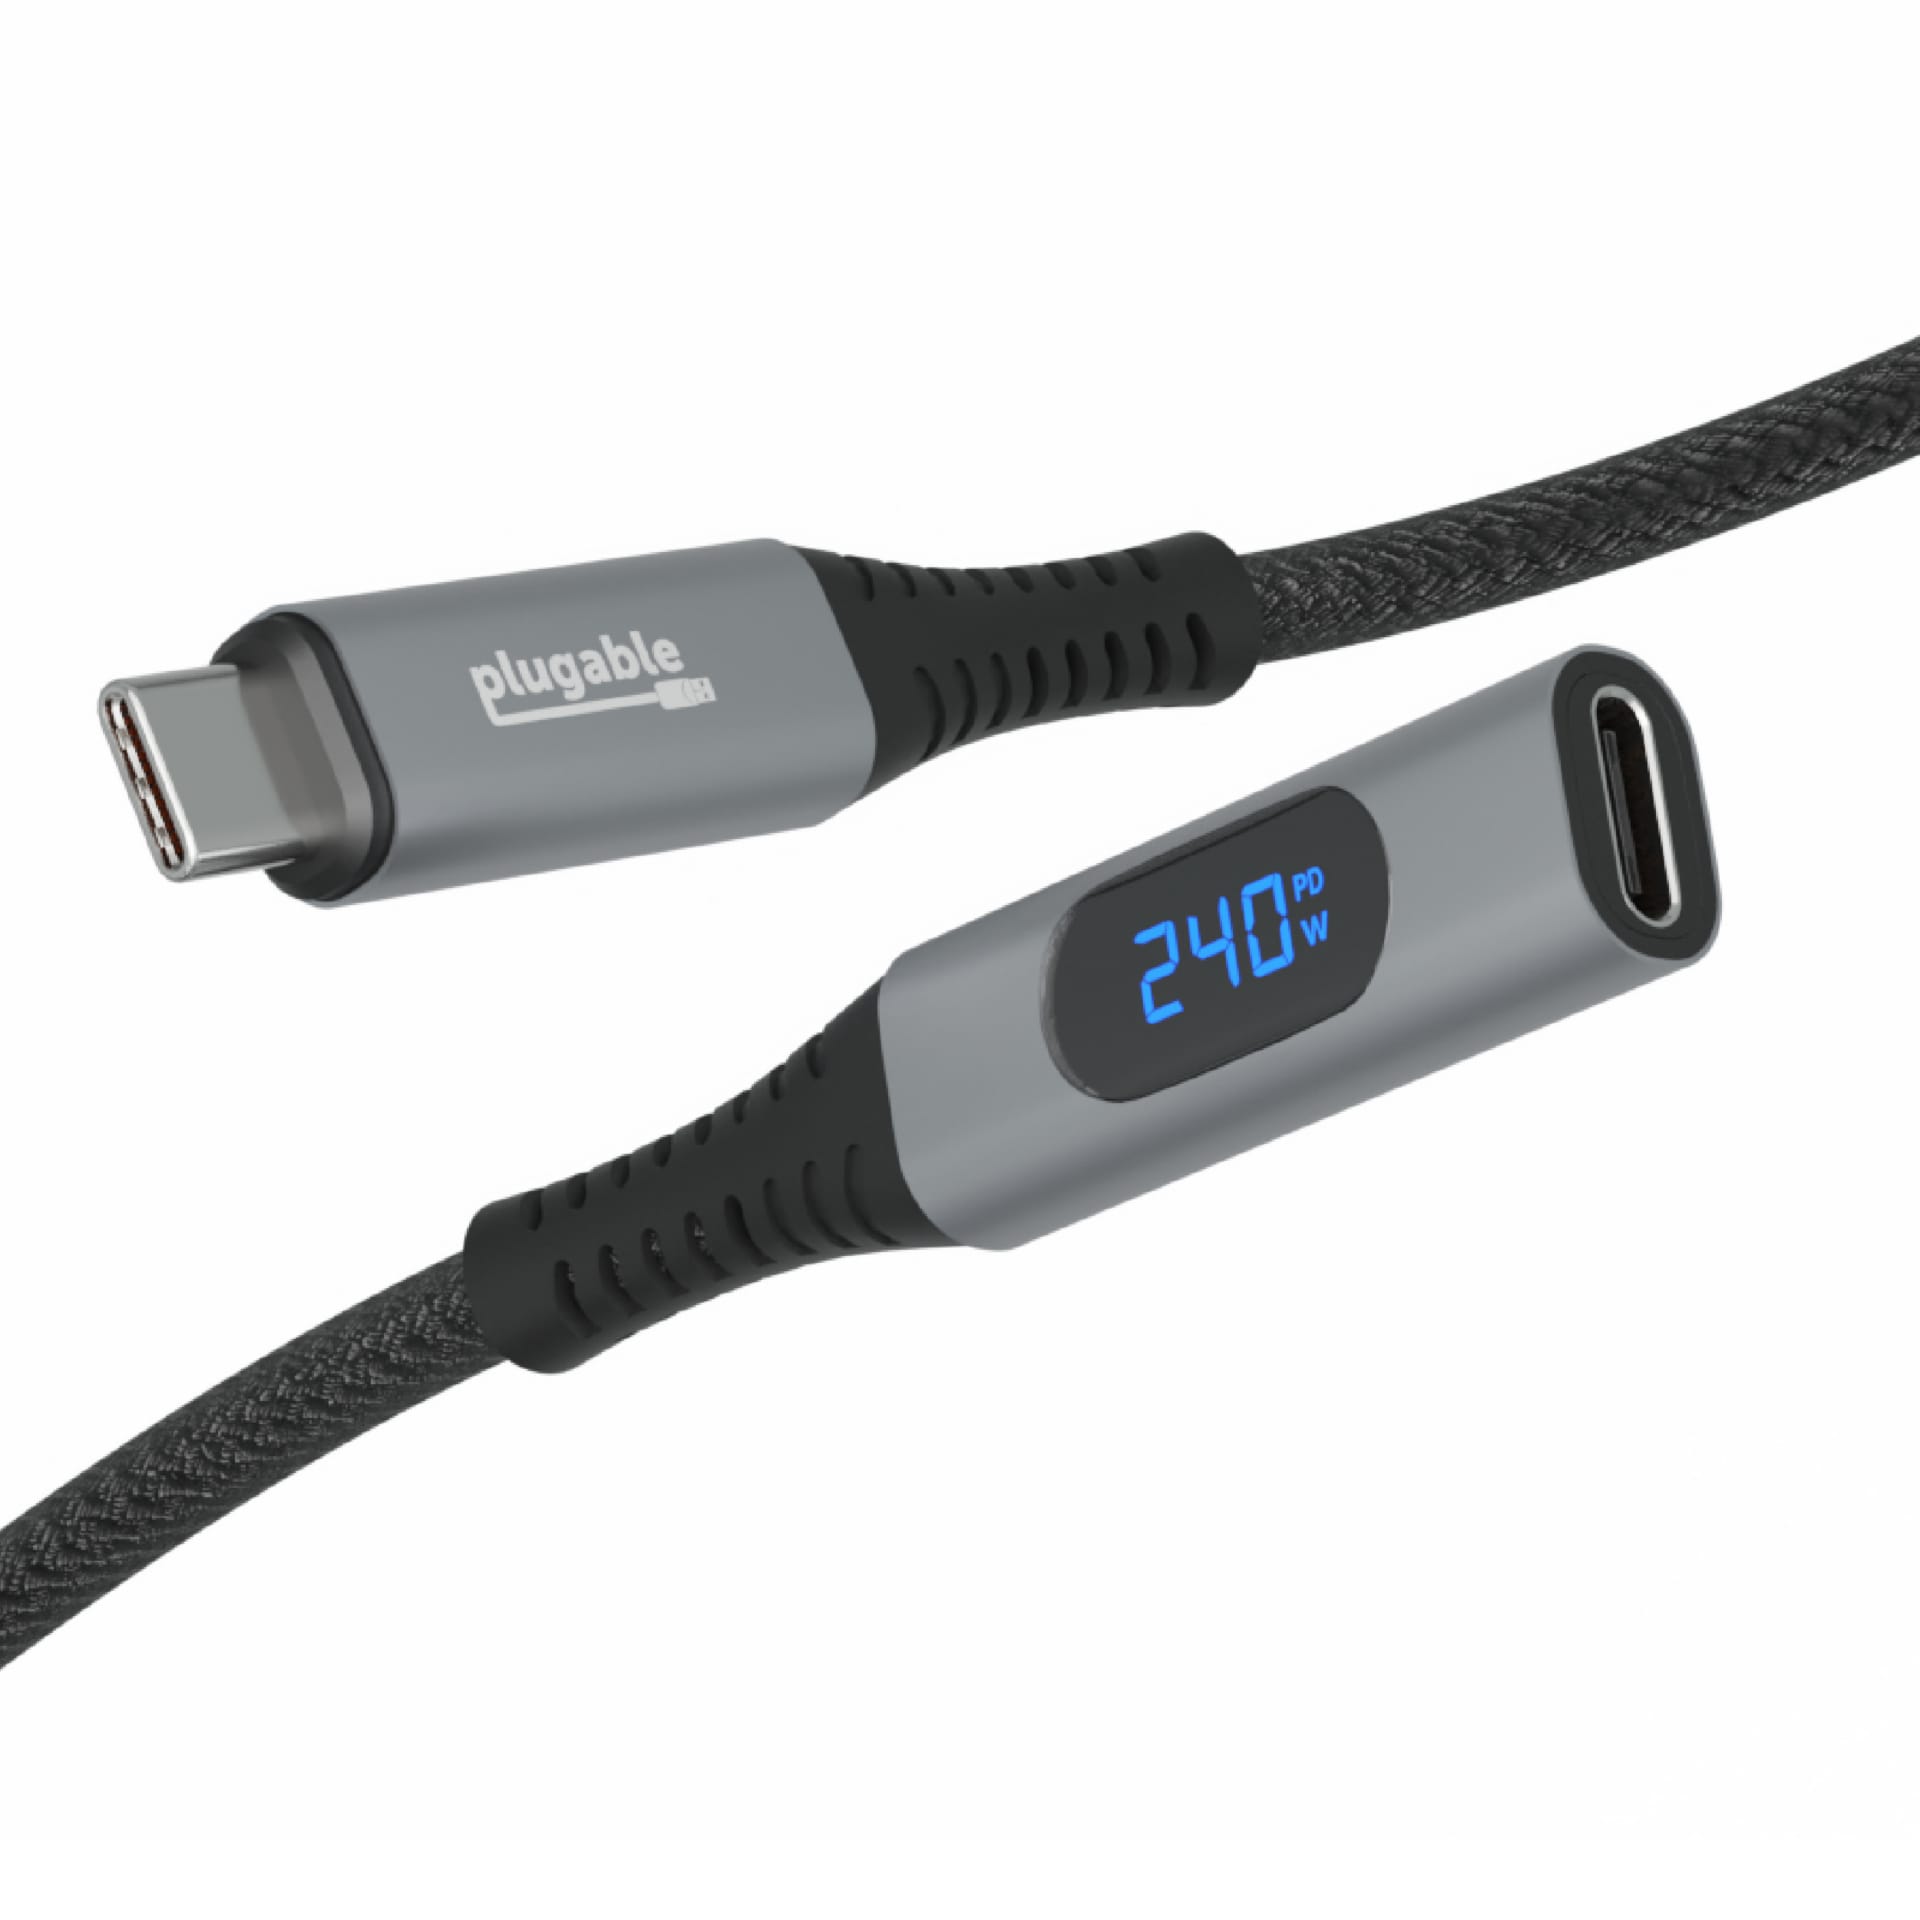 Plugable USB C Extension Cable 3.3', Power Meter Tester, Fast Charging up to 240W, 4K 60Hz Display, 10Gbps Data